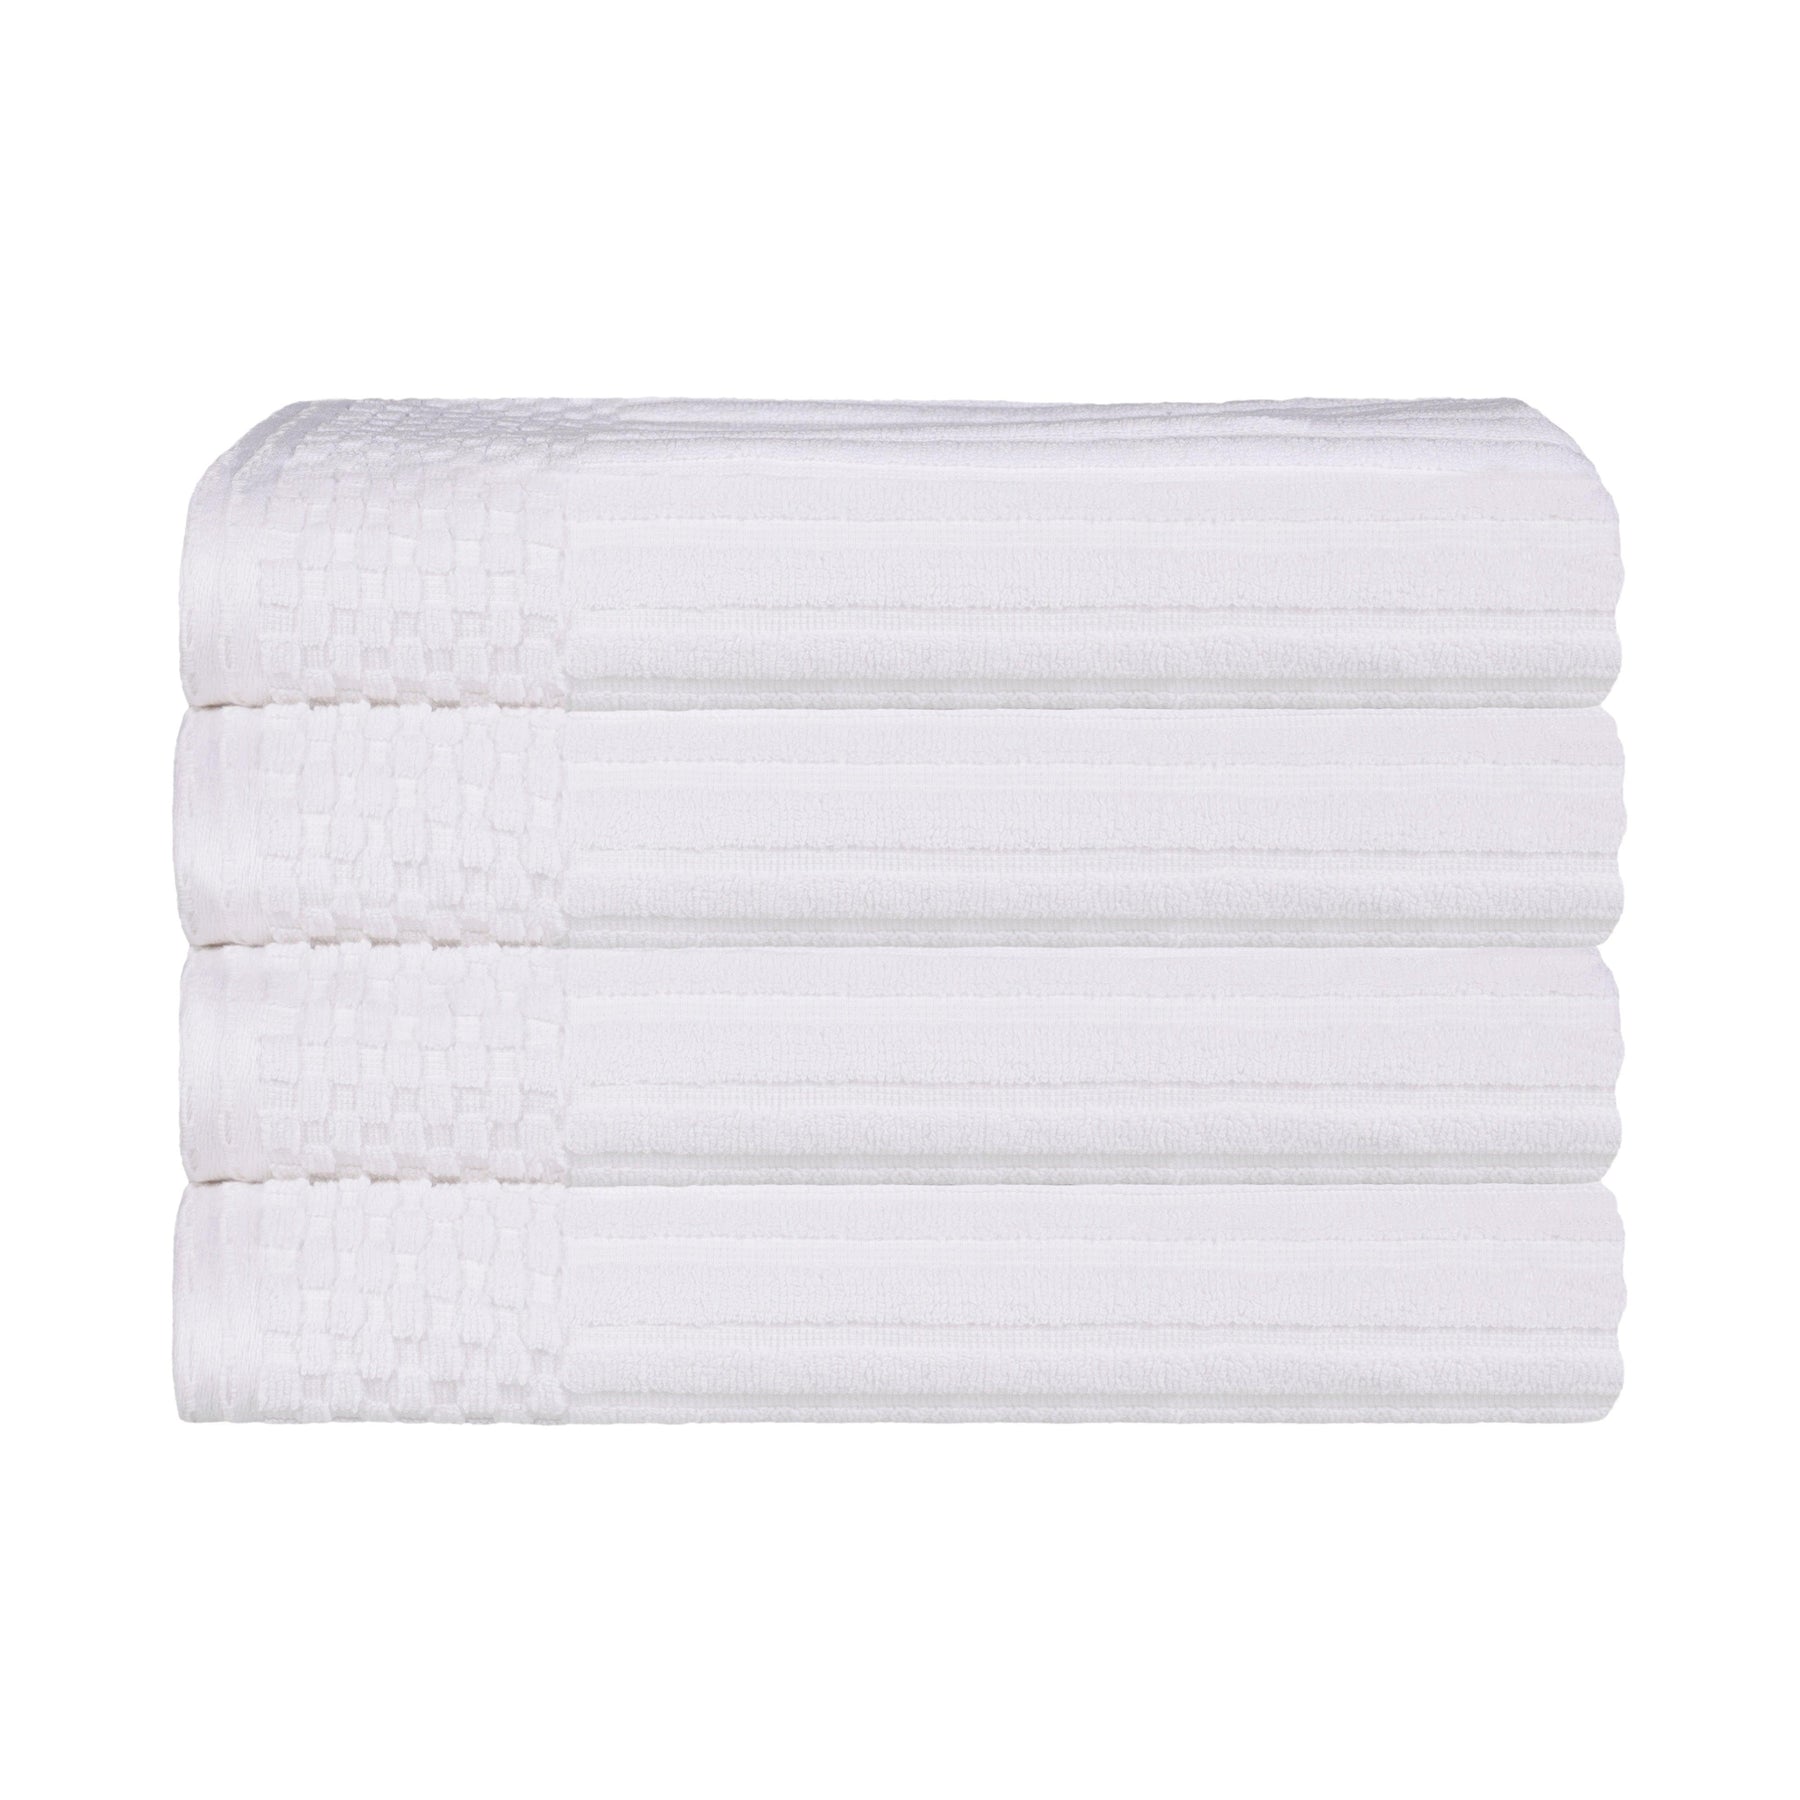 Ribbed Textured Cotton Ultra-Absorbent 4 Piece Hand Towel Set - White